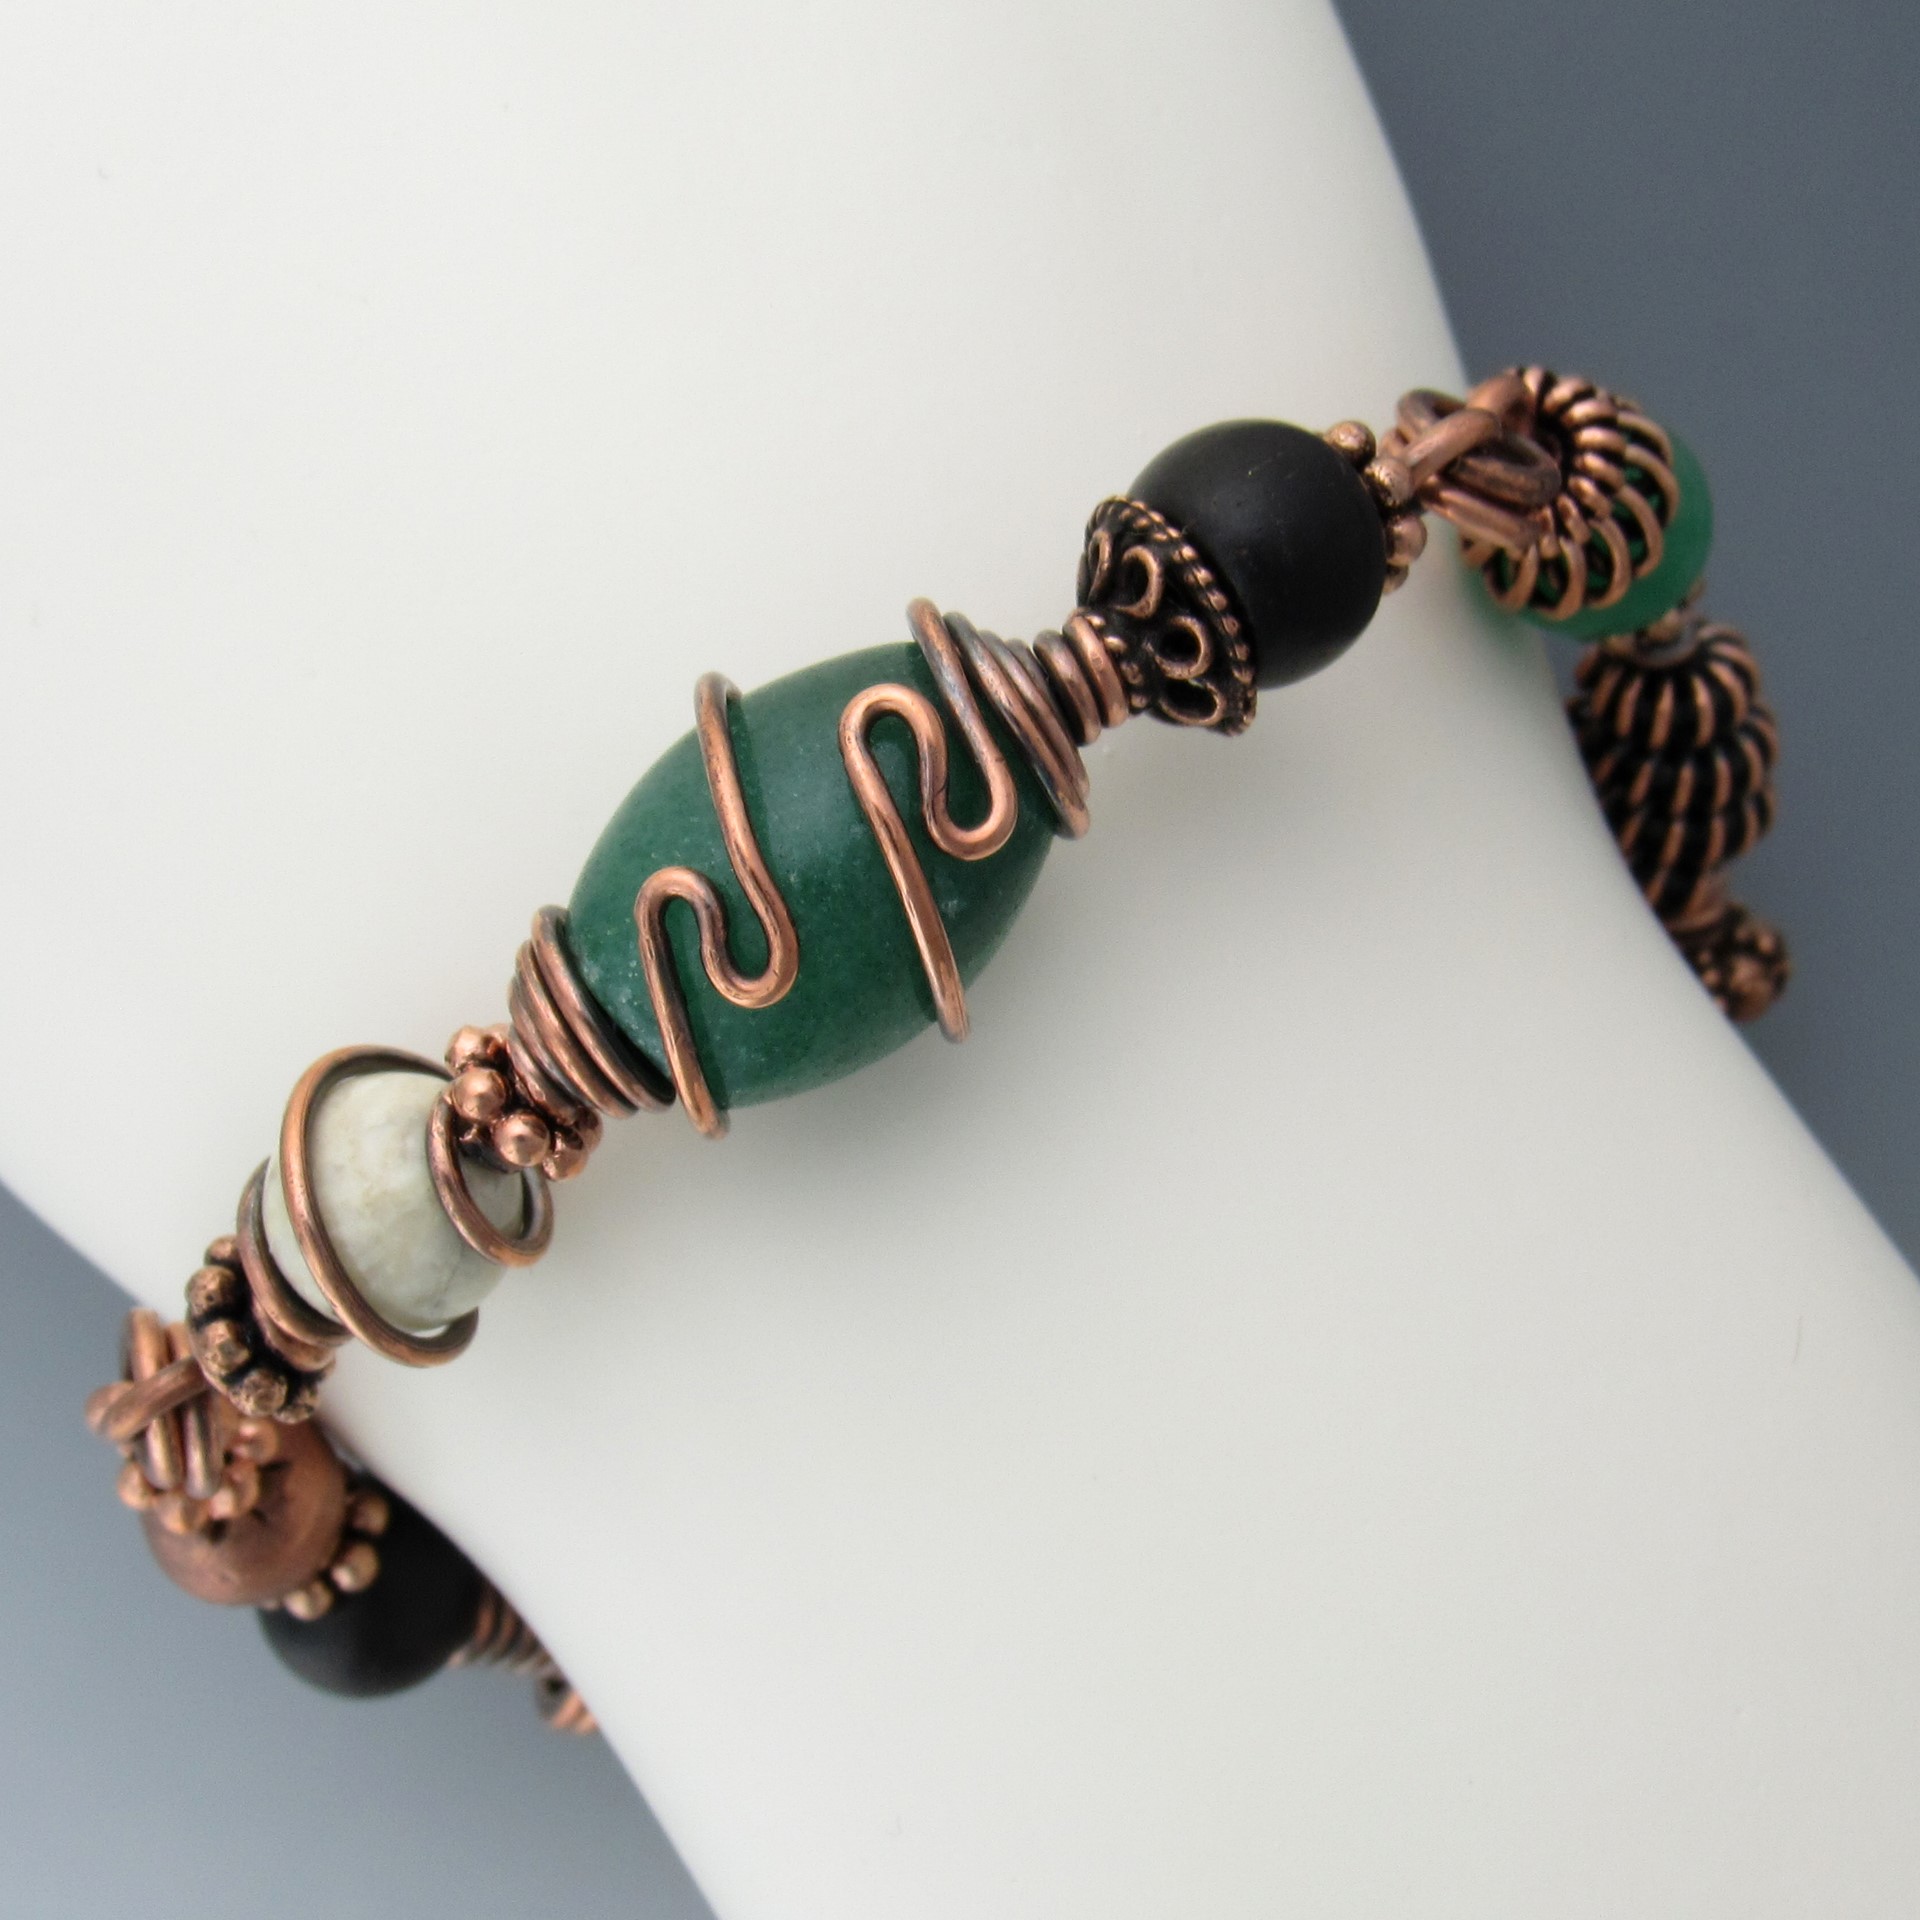 Copper & Leather Necklace